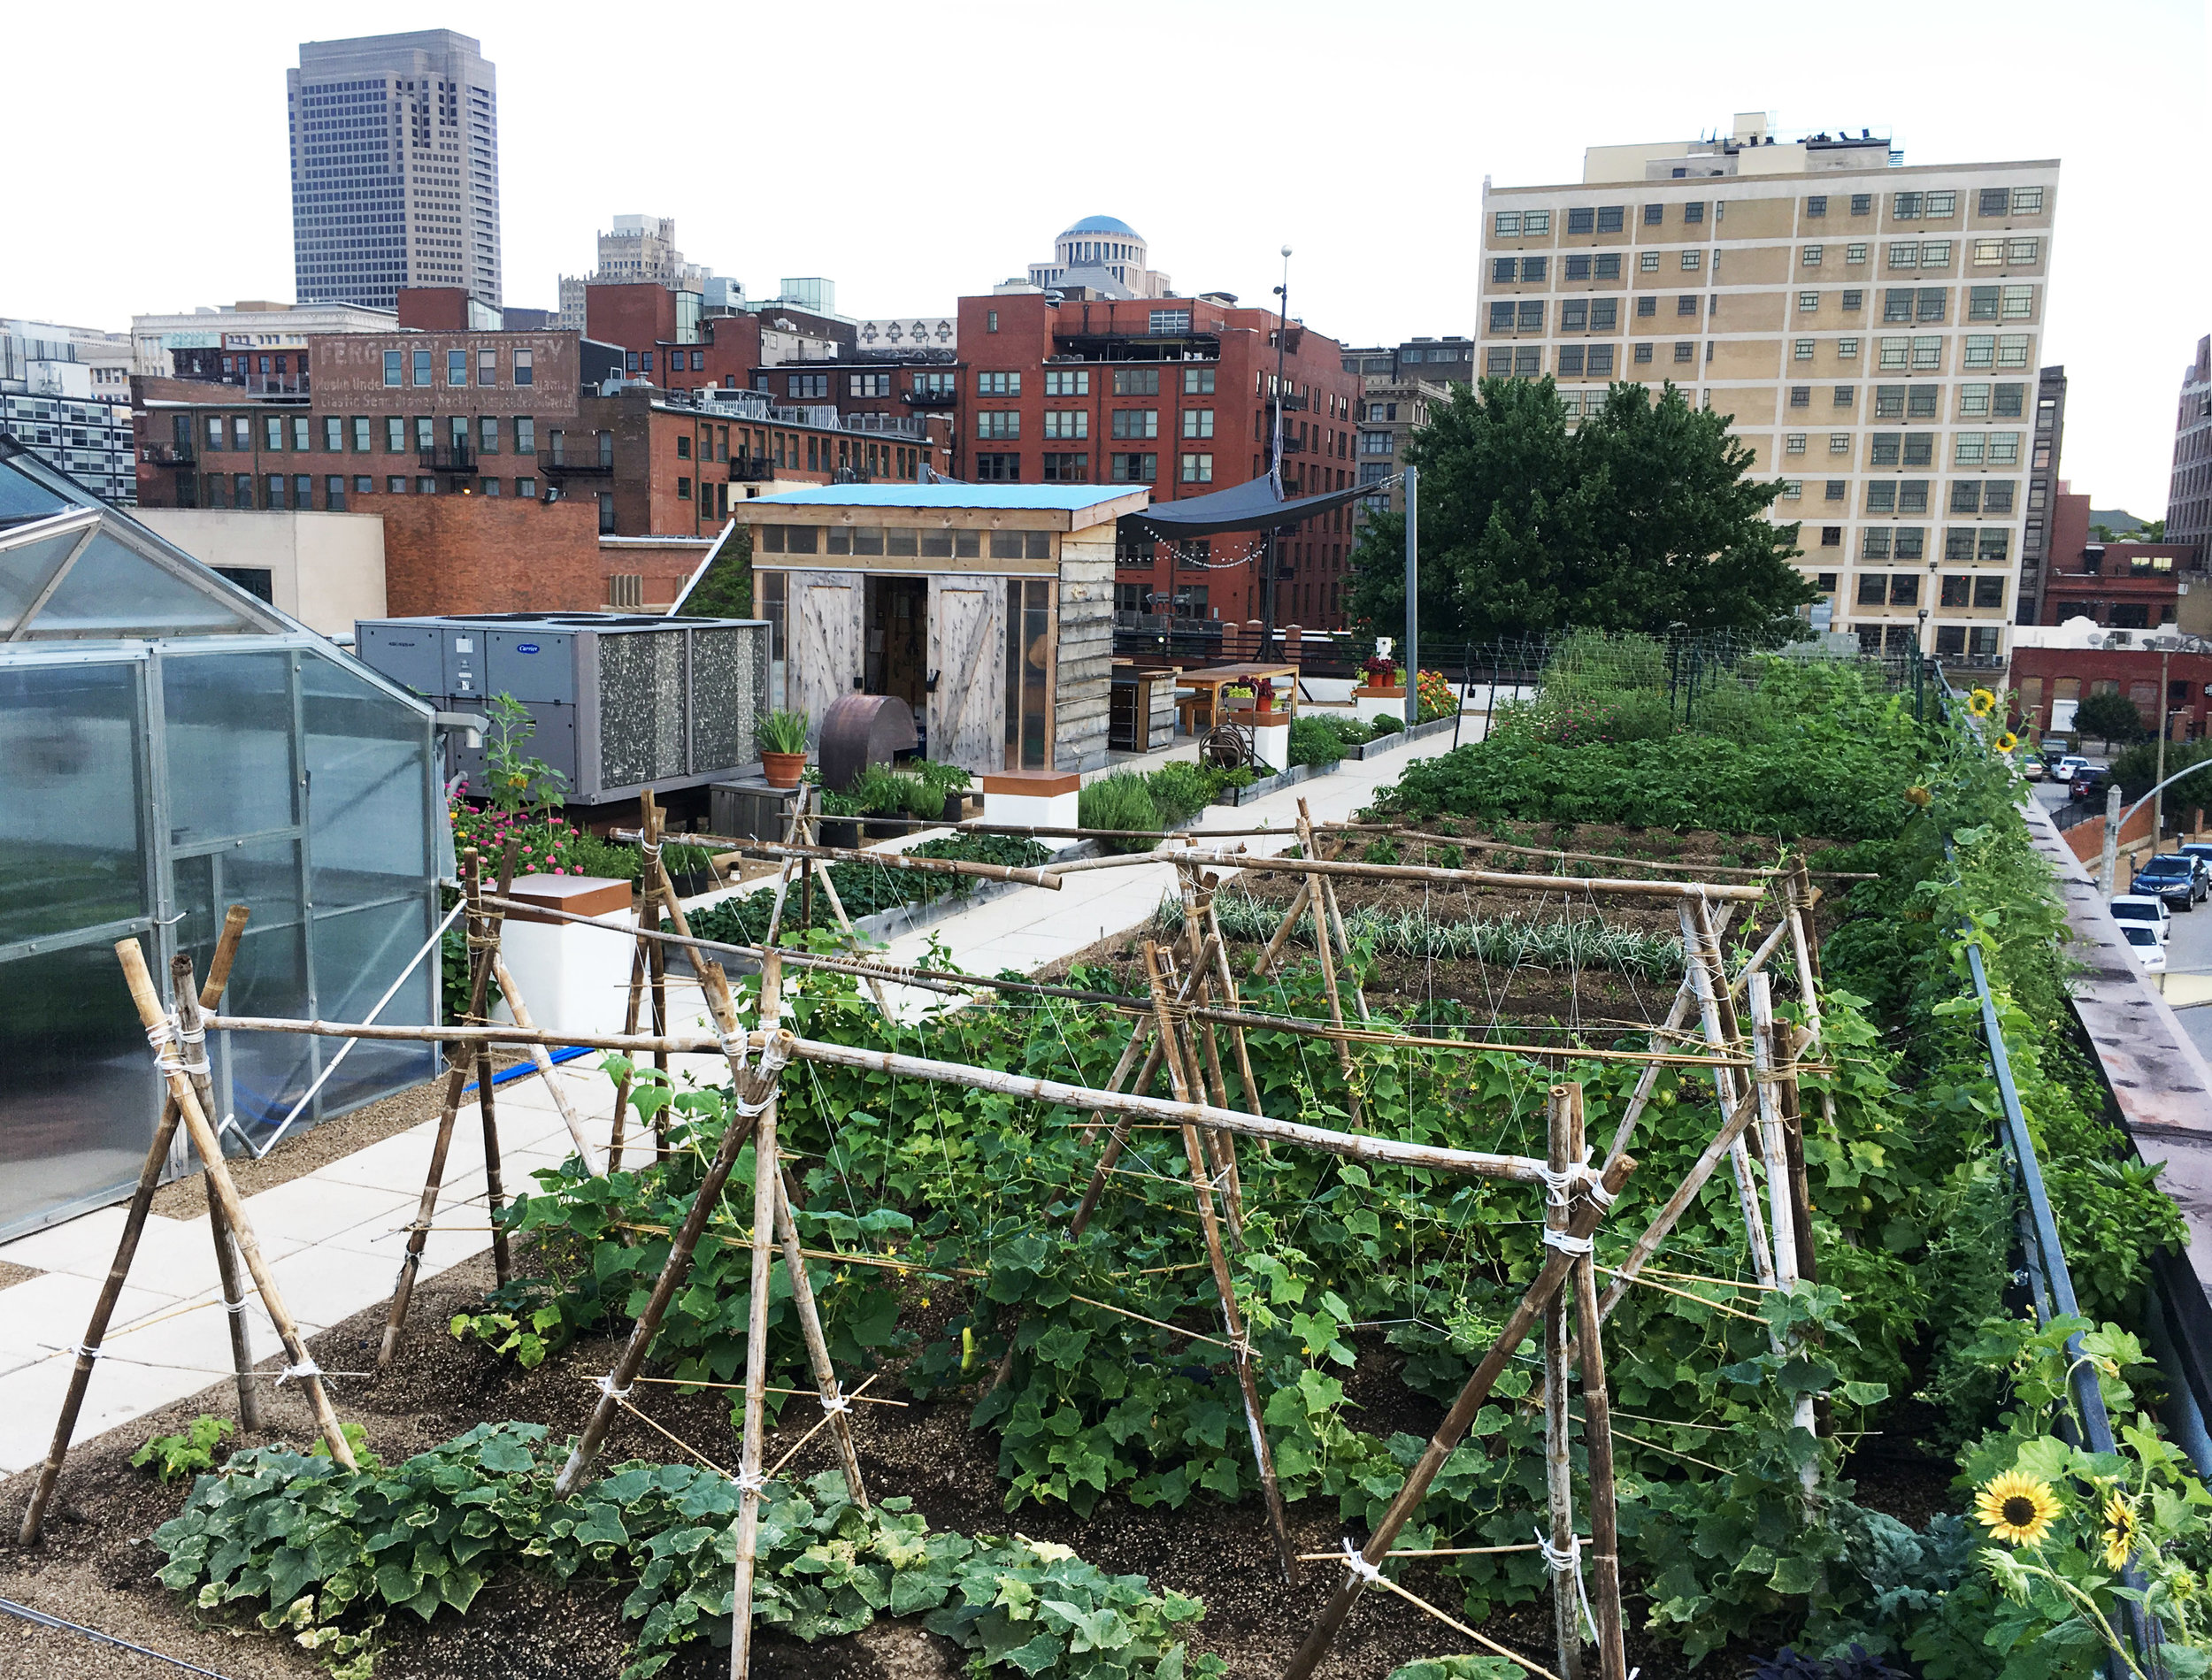 West perspective of farm showcasing trellises, greenhouse, farm rows, shed, and downtown buildings in the background. 